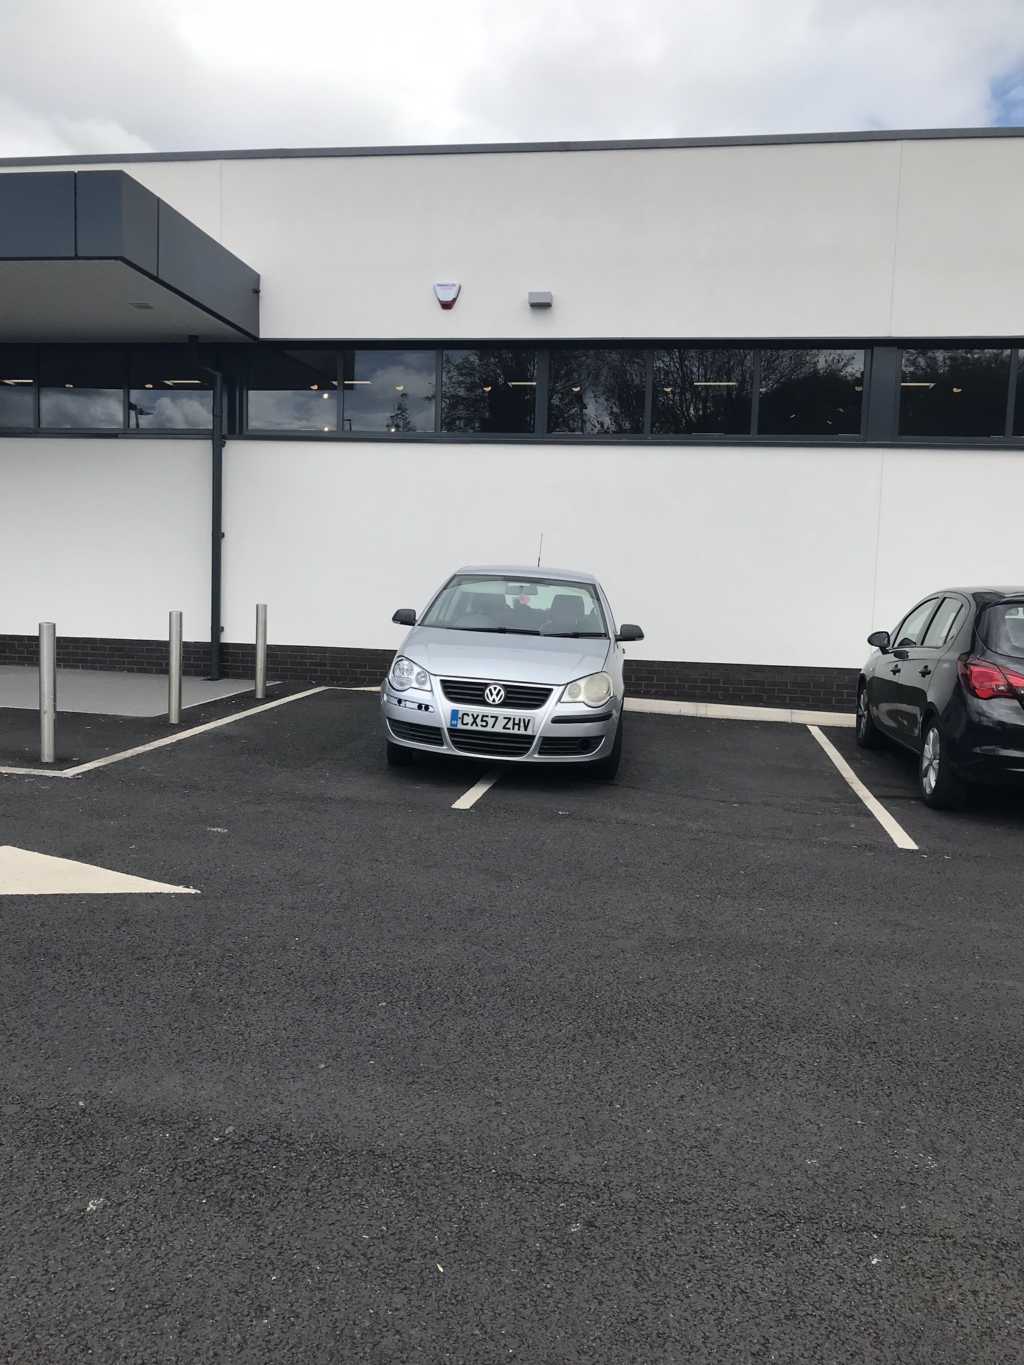 CX57 ZHV displaying Inconsiderate Parking